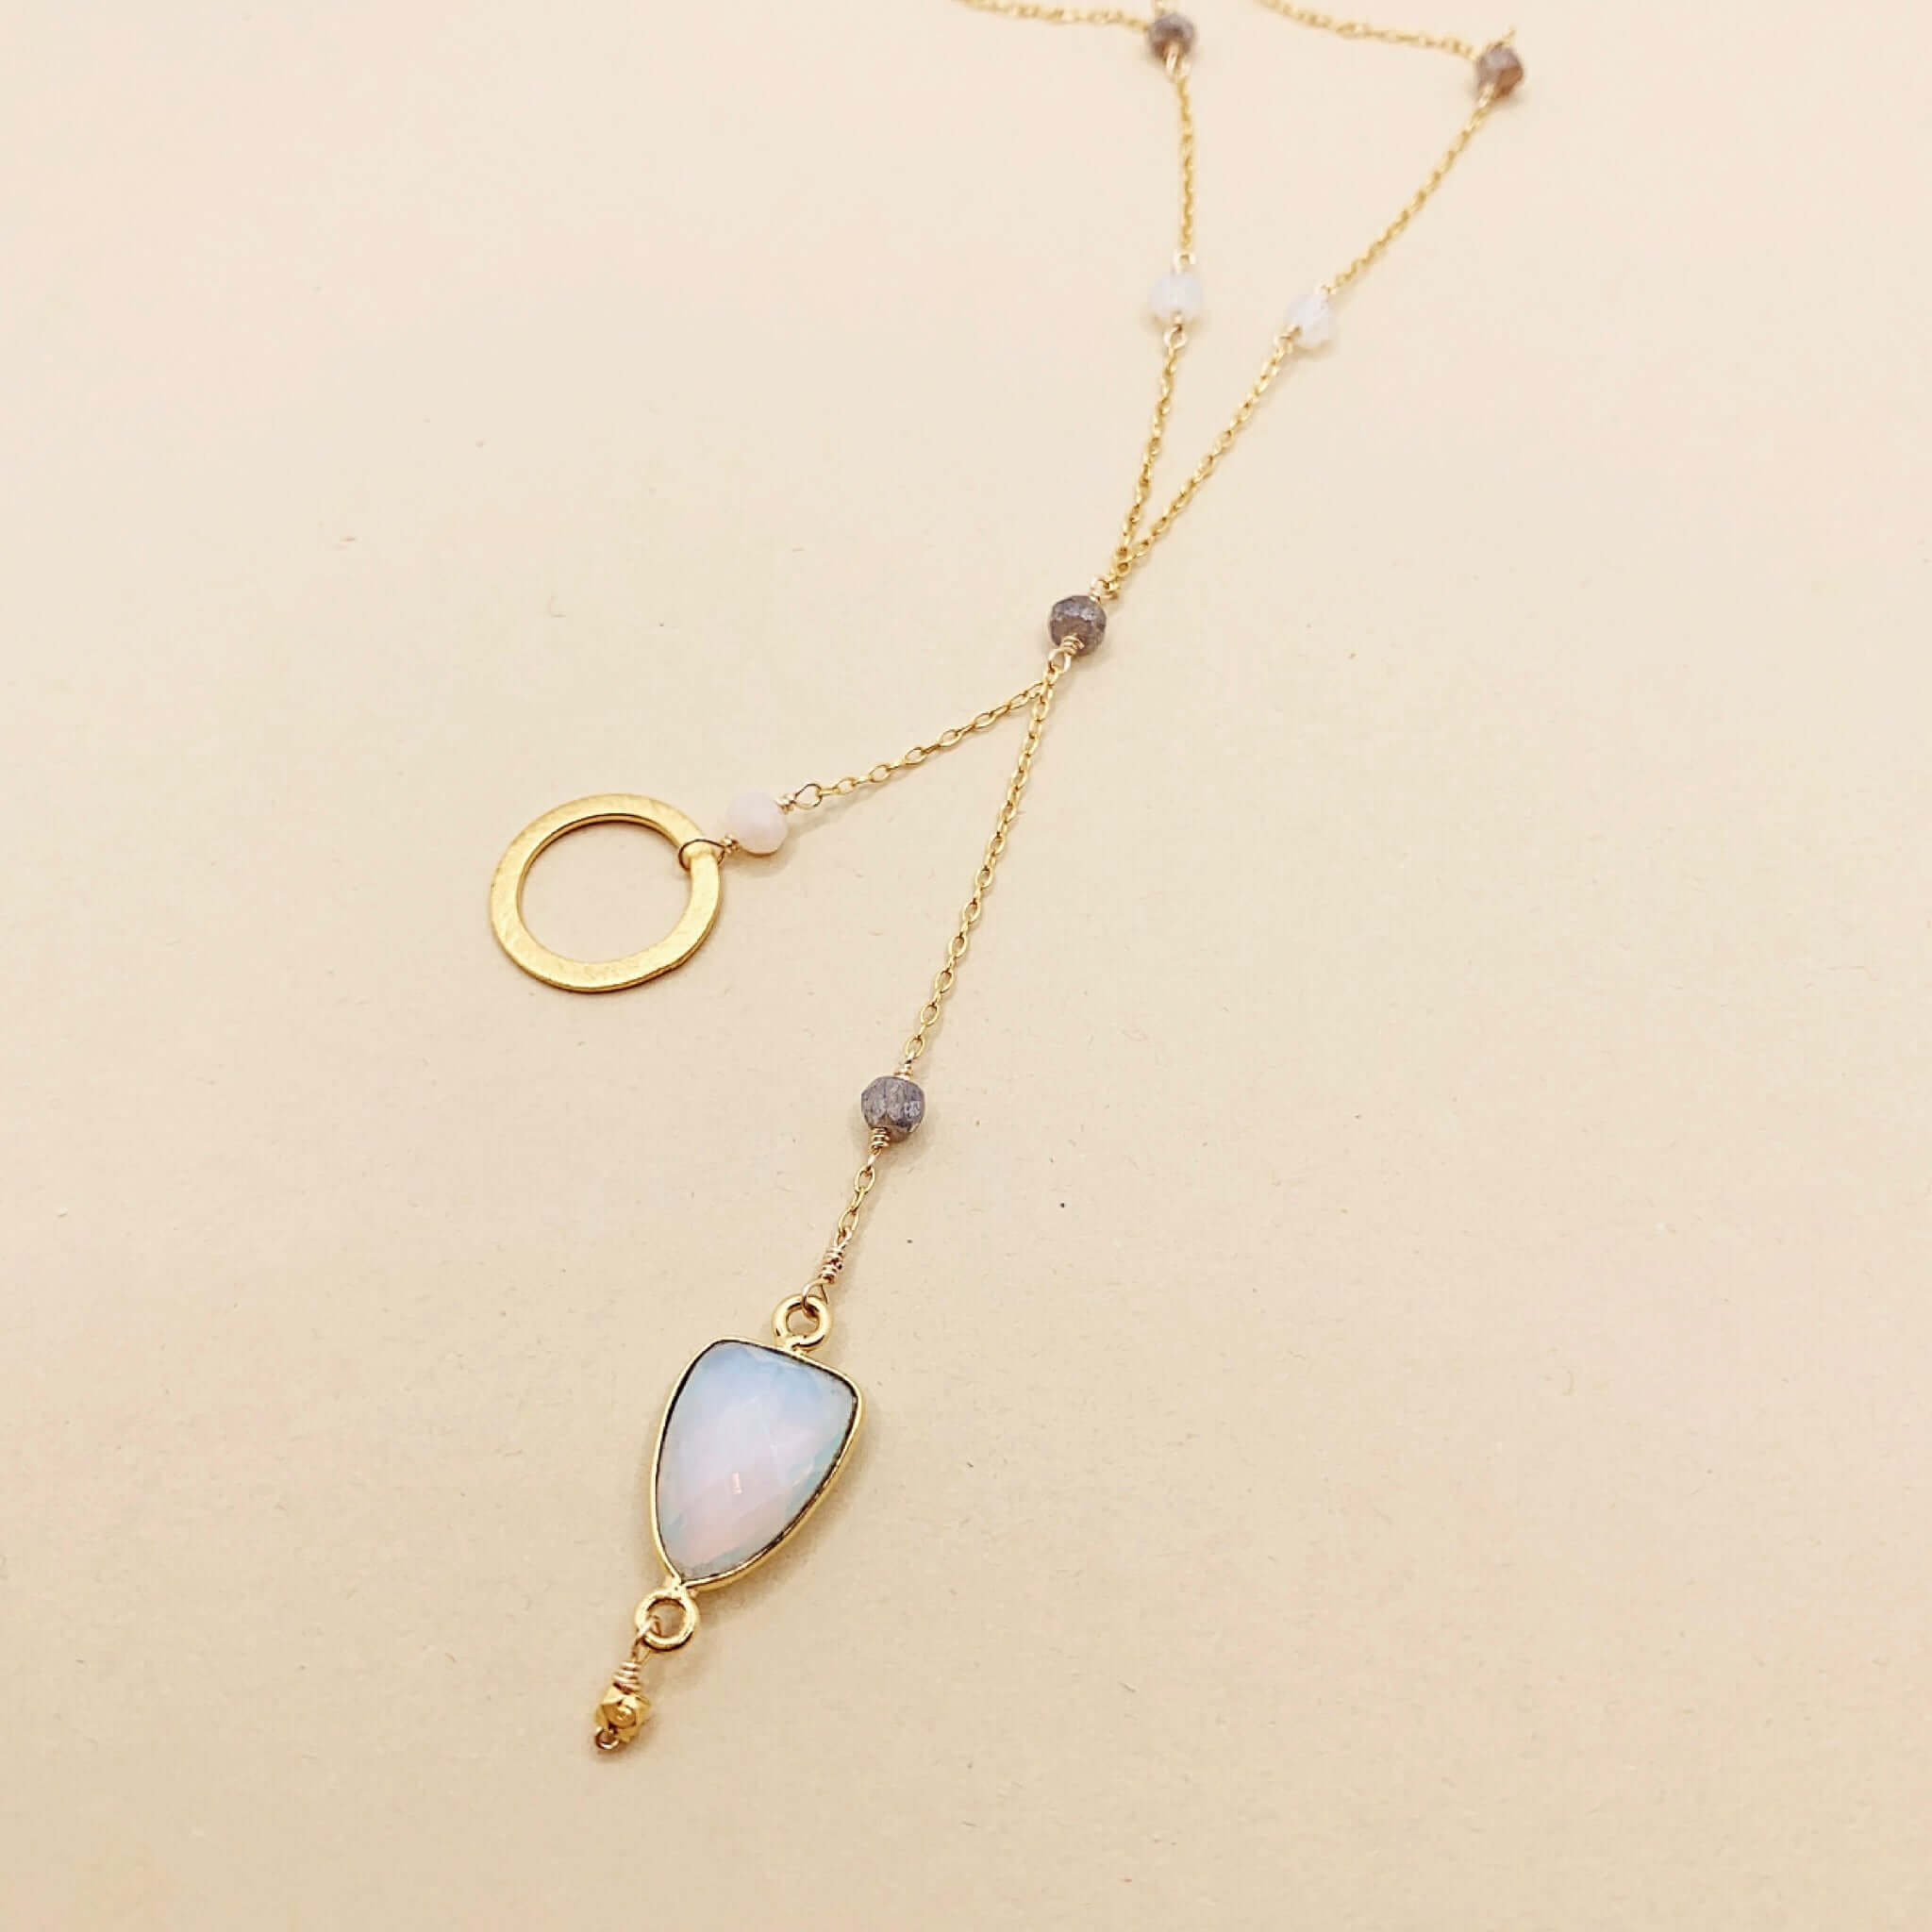 Ballet necklace with a beautiful circle accent and geometric Opal Quartz gemstones